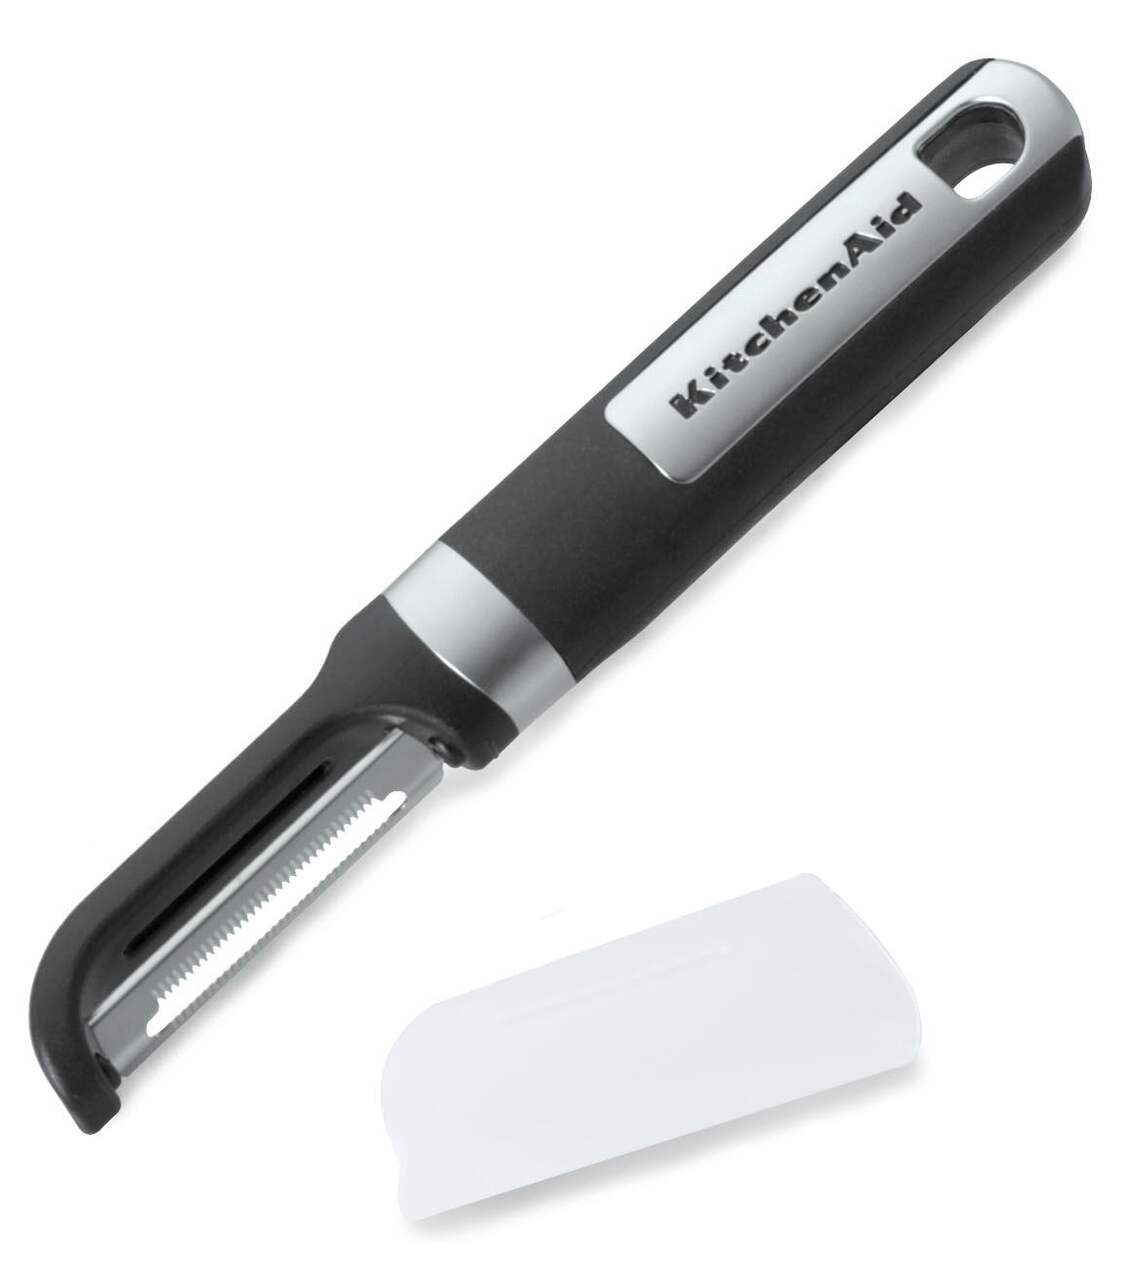 https://media-www.canadiantire.ca/product/living/kitchen/kitchen-tools-thermometers/0422731/kitchenaid-black-euro-peeler-cfc299be-08b0-4c0a-808a-fad03177e1d0-jpgrendition.jpg?imdensity=1&imwidth=640&impolicy=mZoom